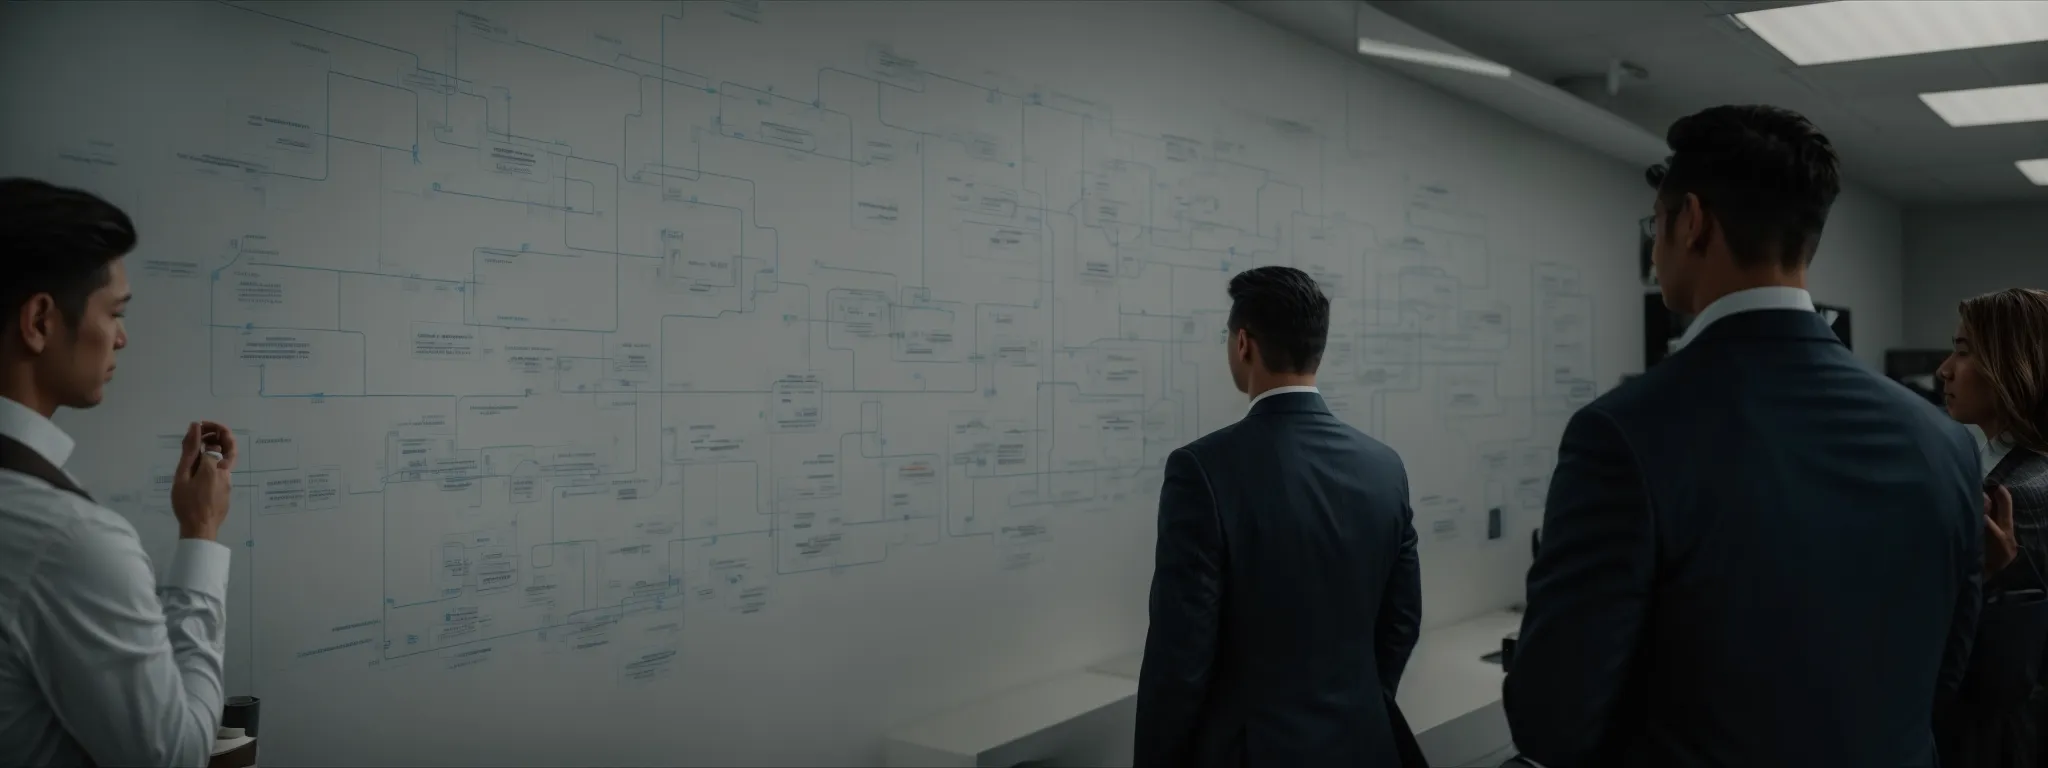 a group of professionals analyzes a large flowchart on the wall, illustrating various customer pathways in different industry sectors.